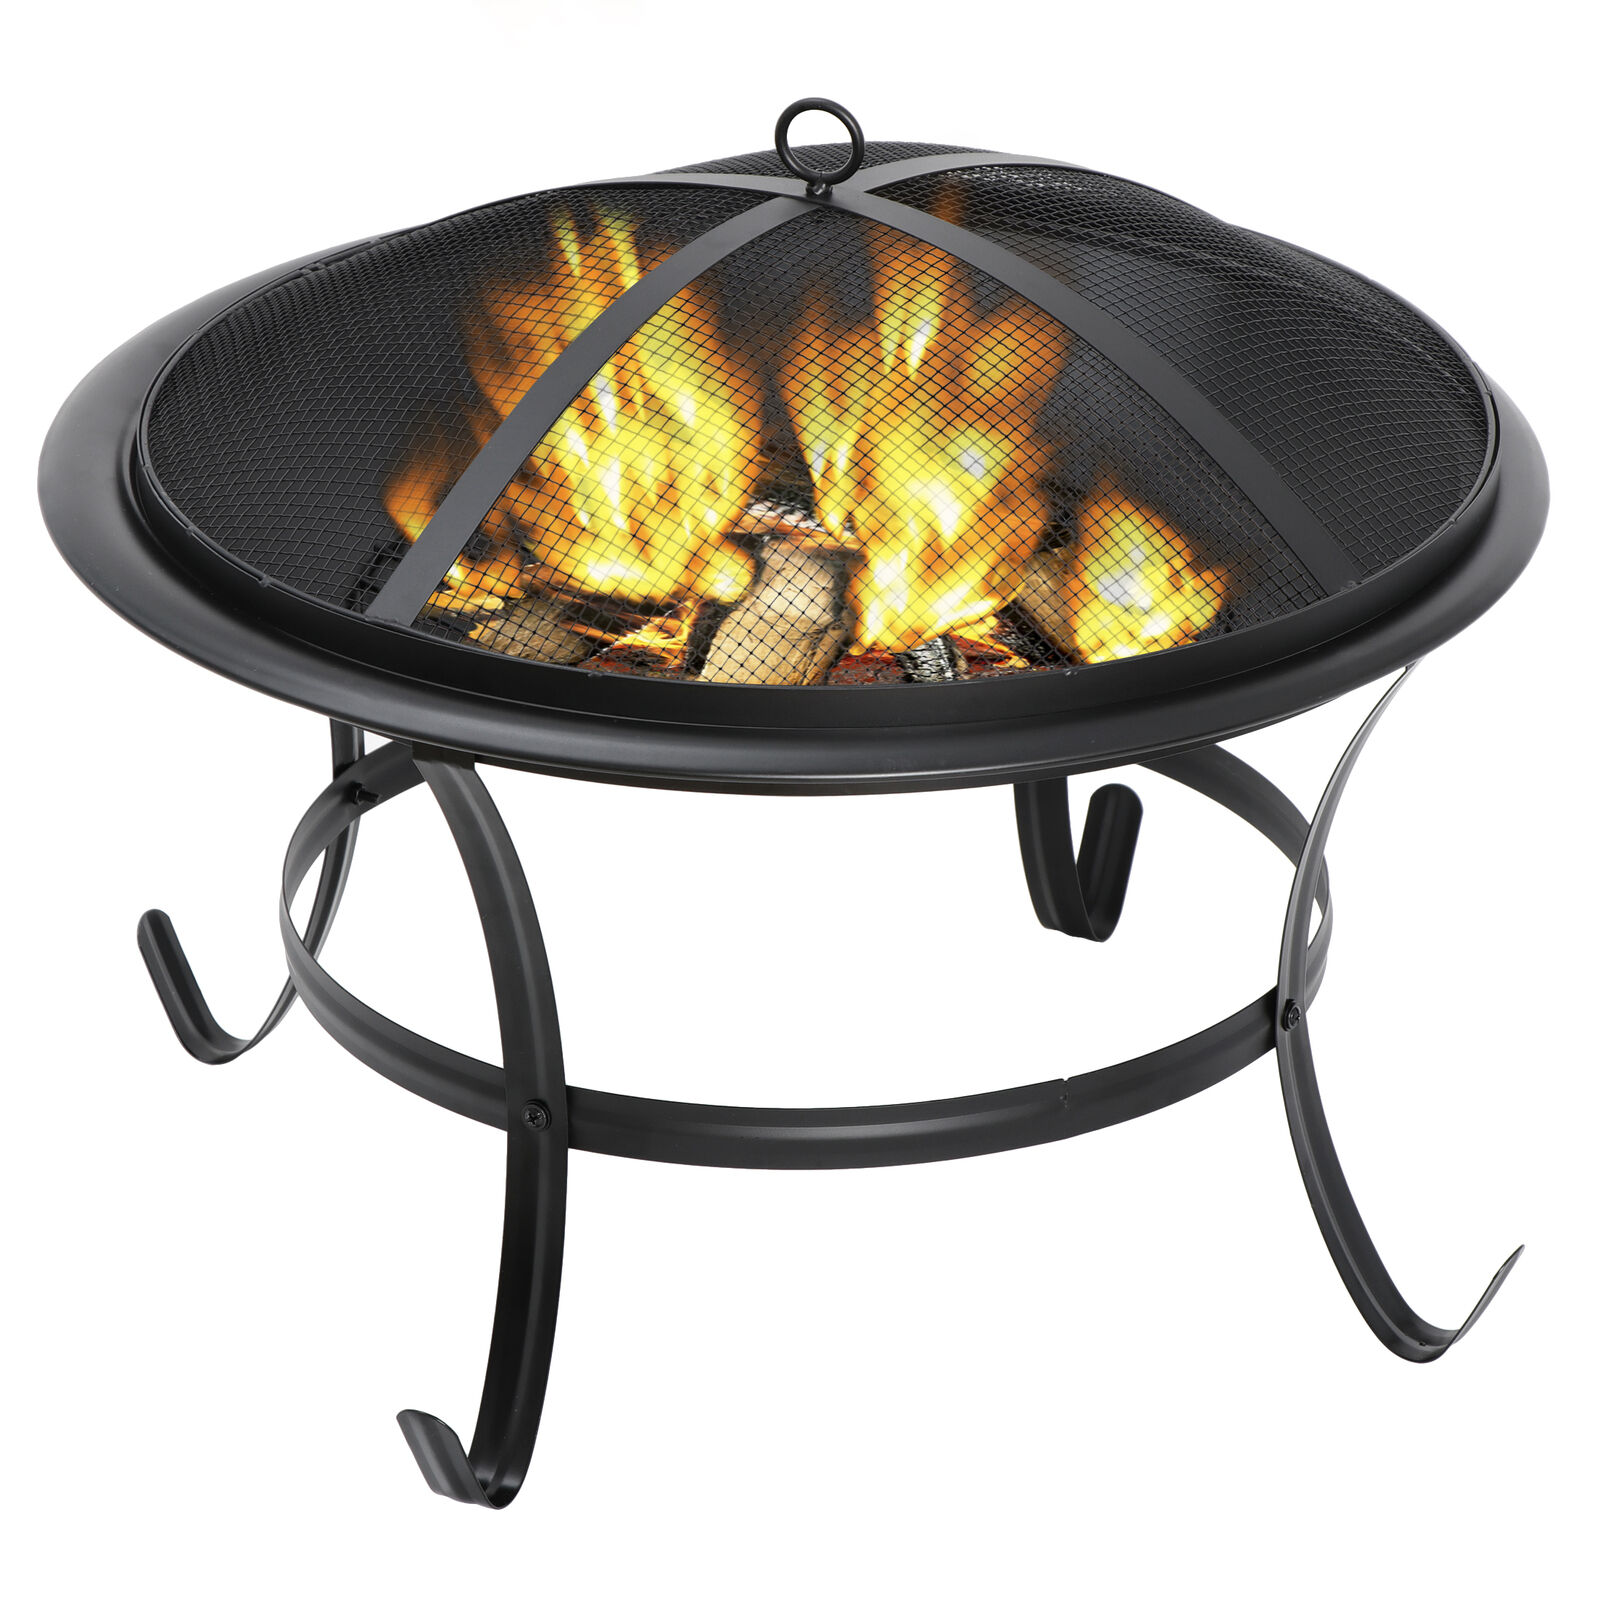 22" Fire Pit Firepit Bowl Wood Burning Heater Outdoor Backyard Patio Stove